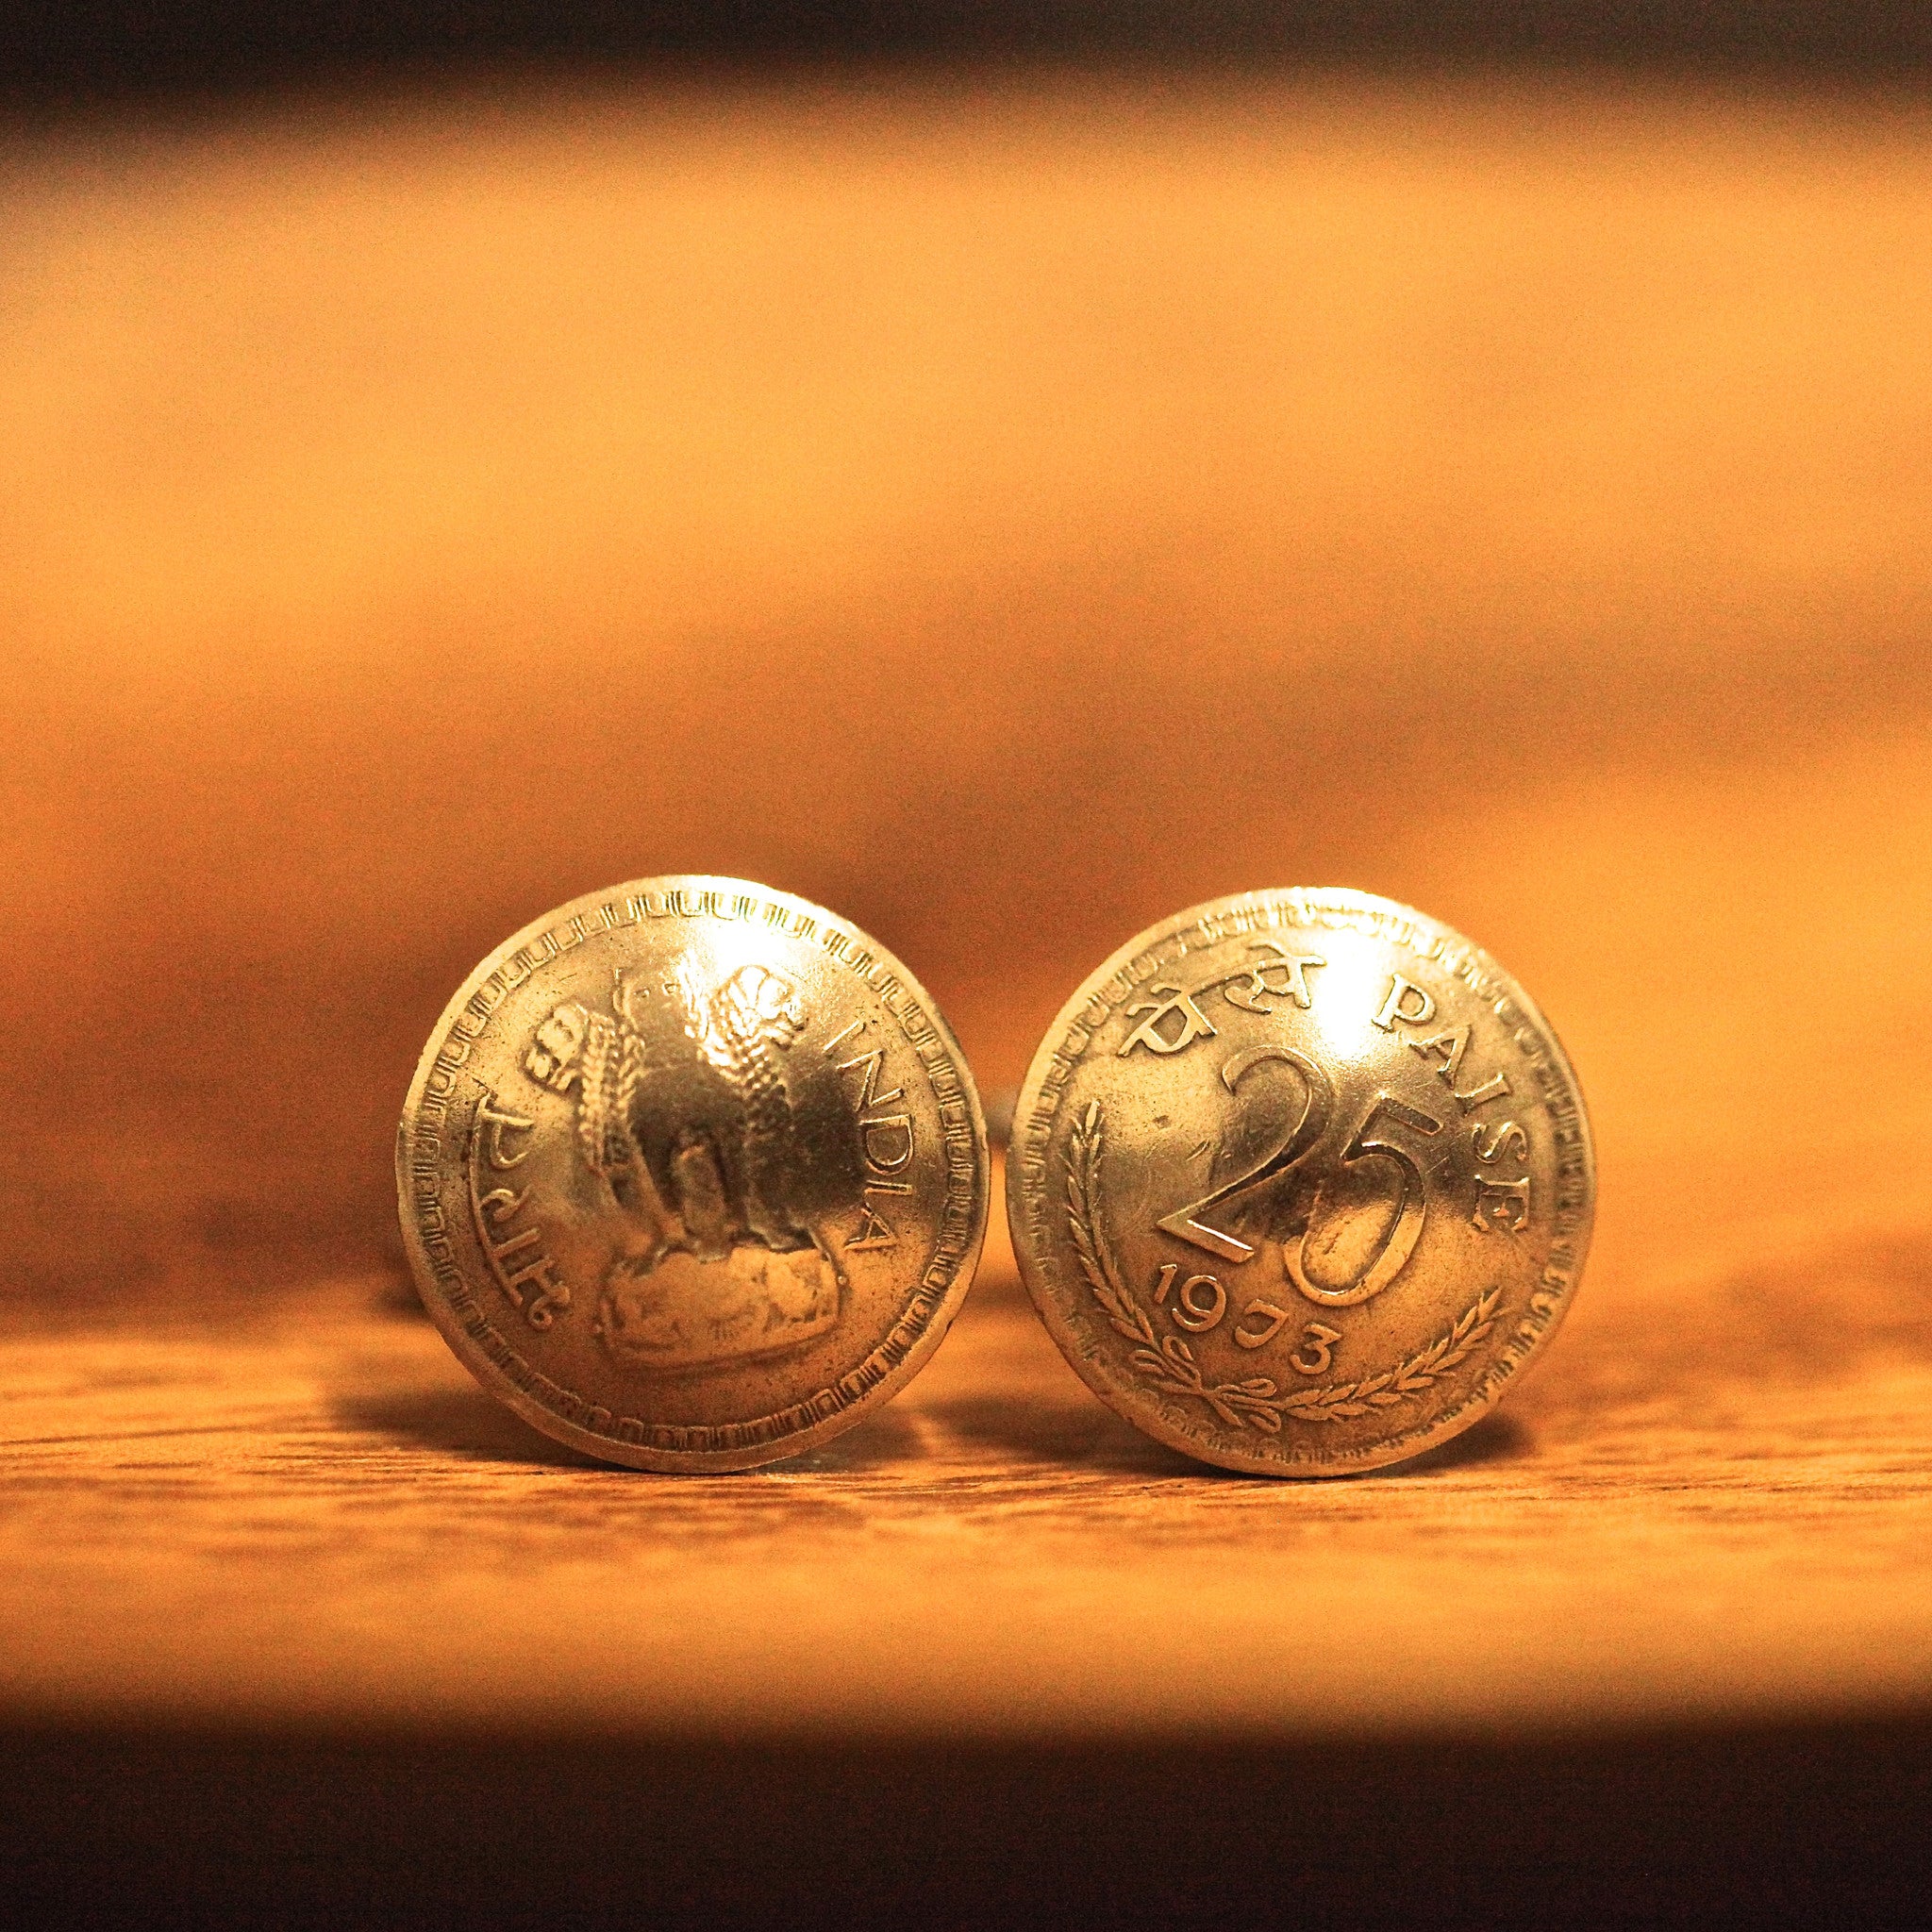 Cufflinks with Indian Coins